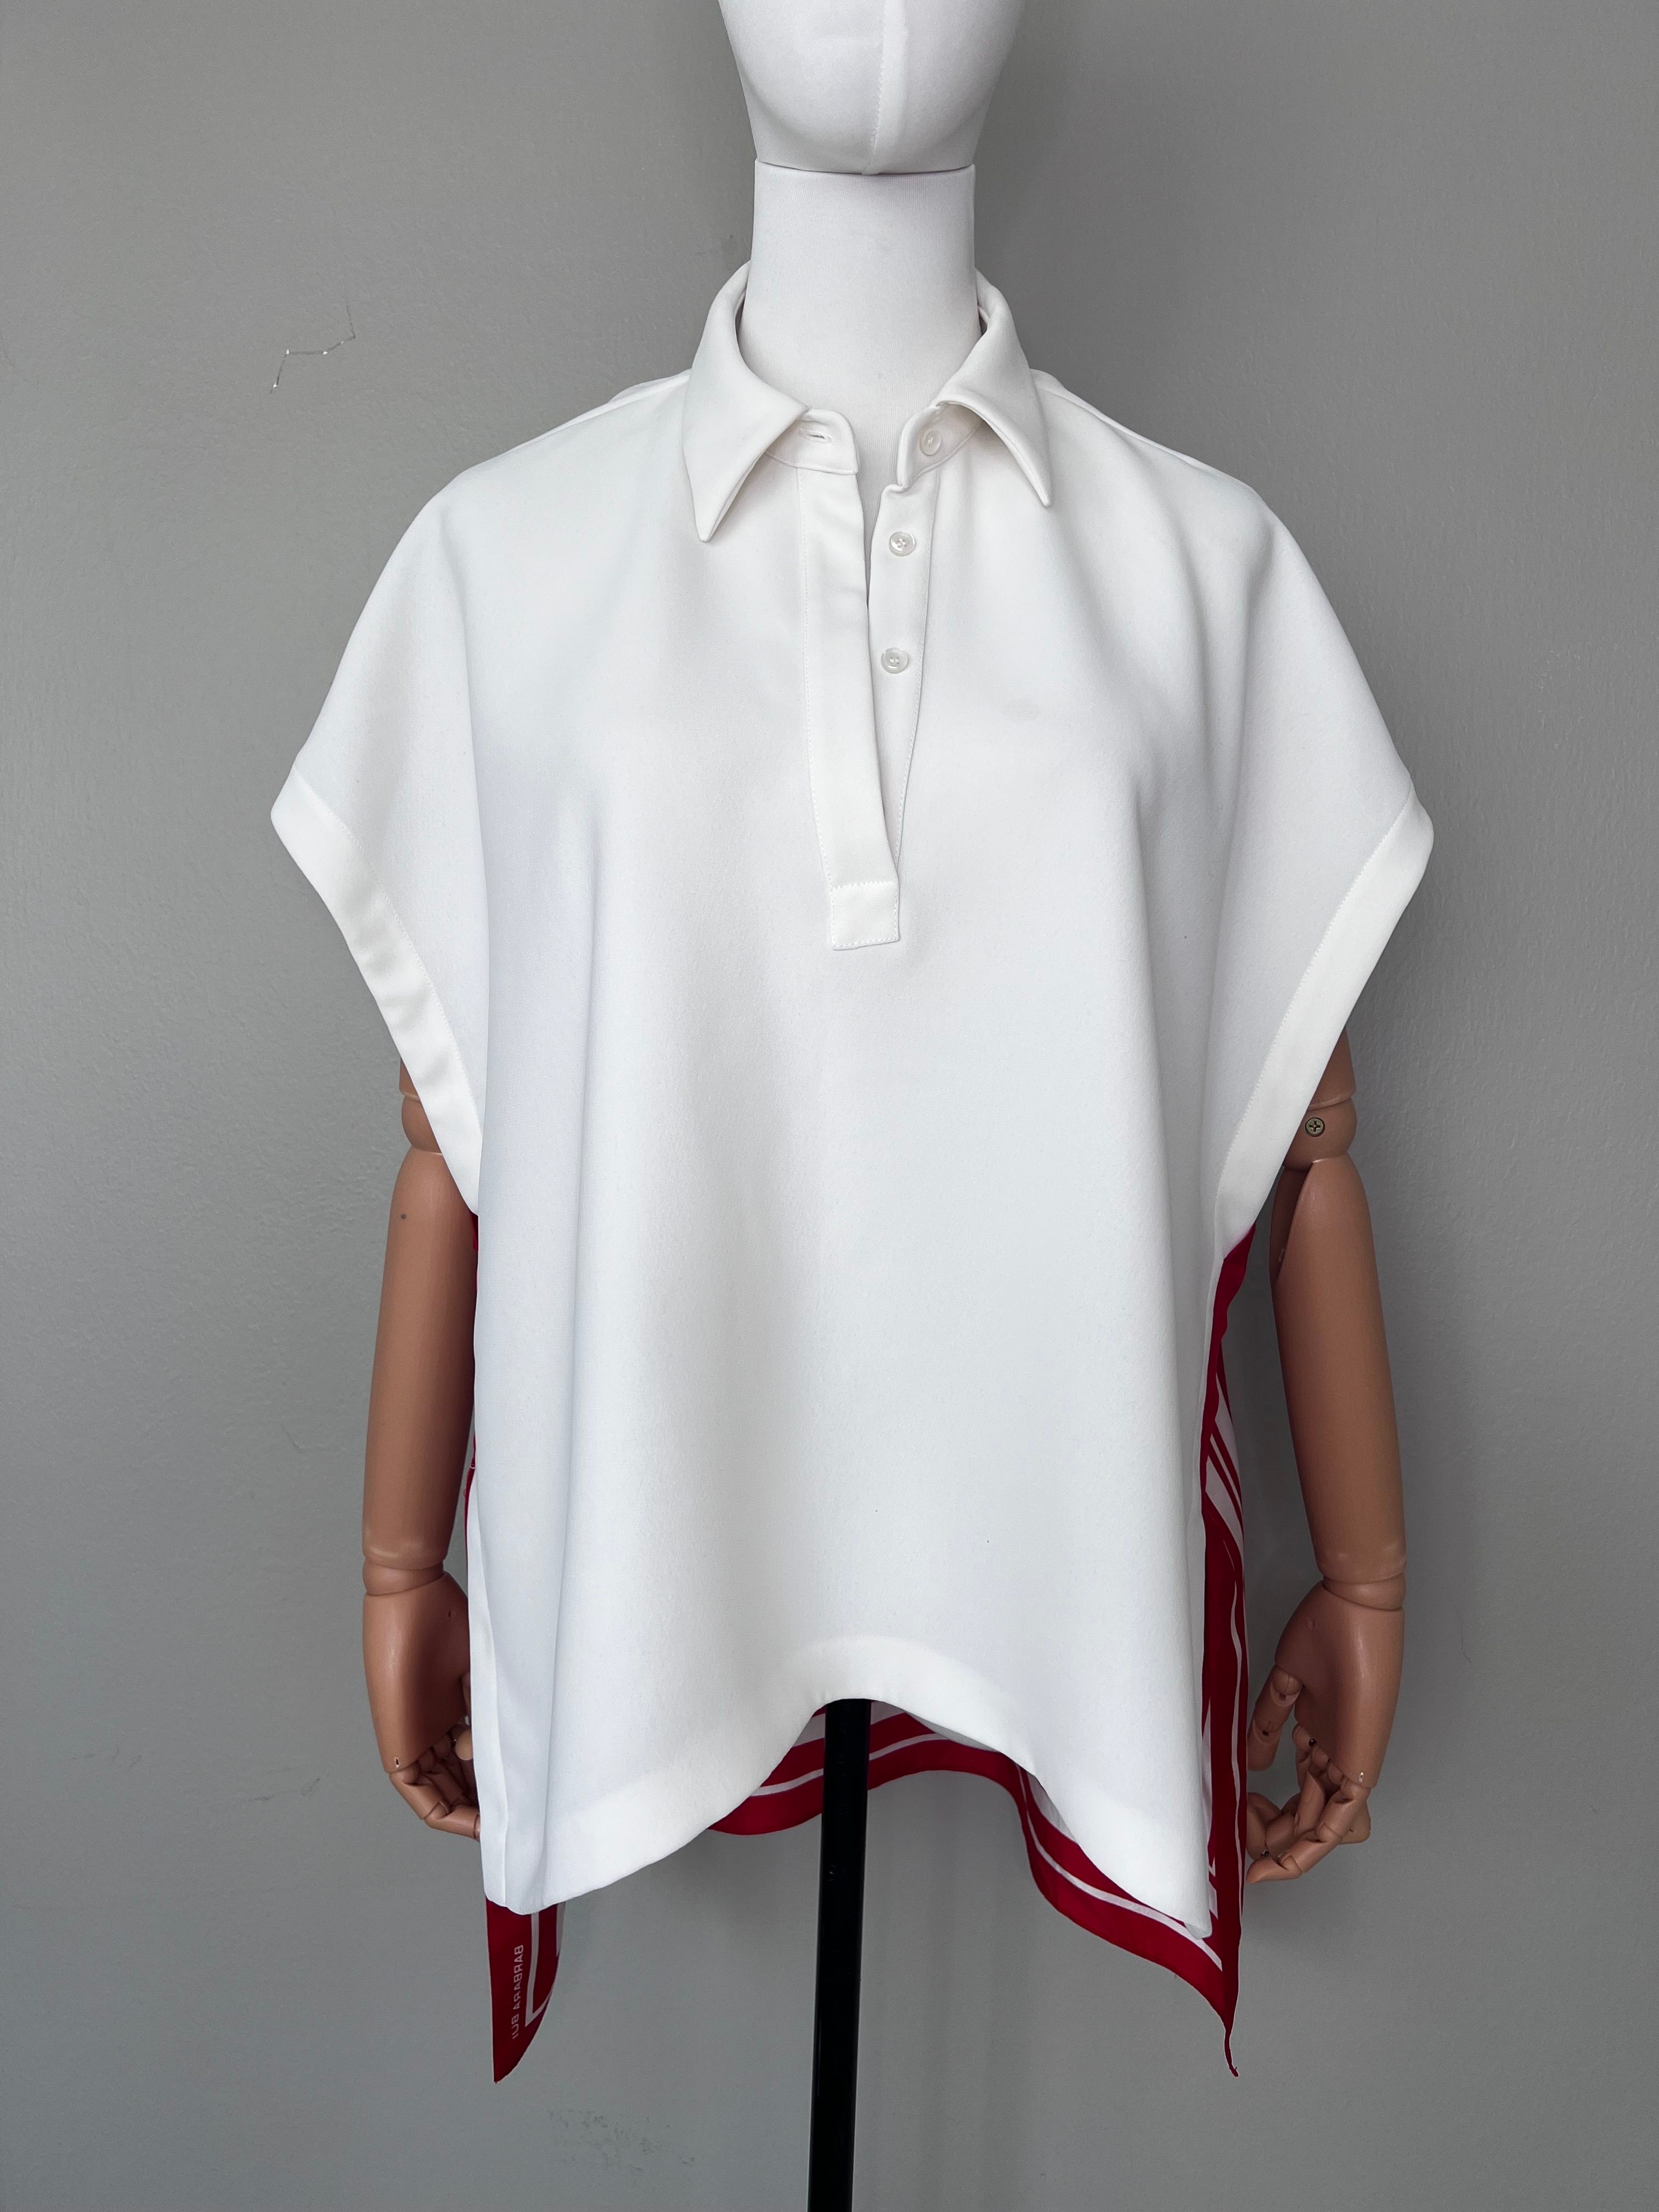 White dress shirt with unique red design draping - BARBARA BUI